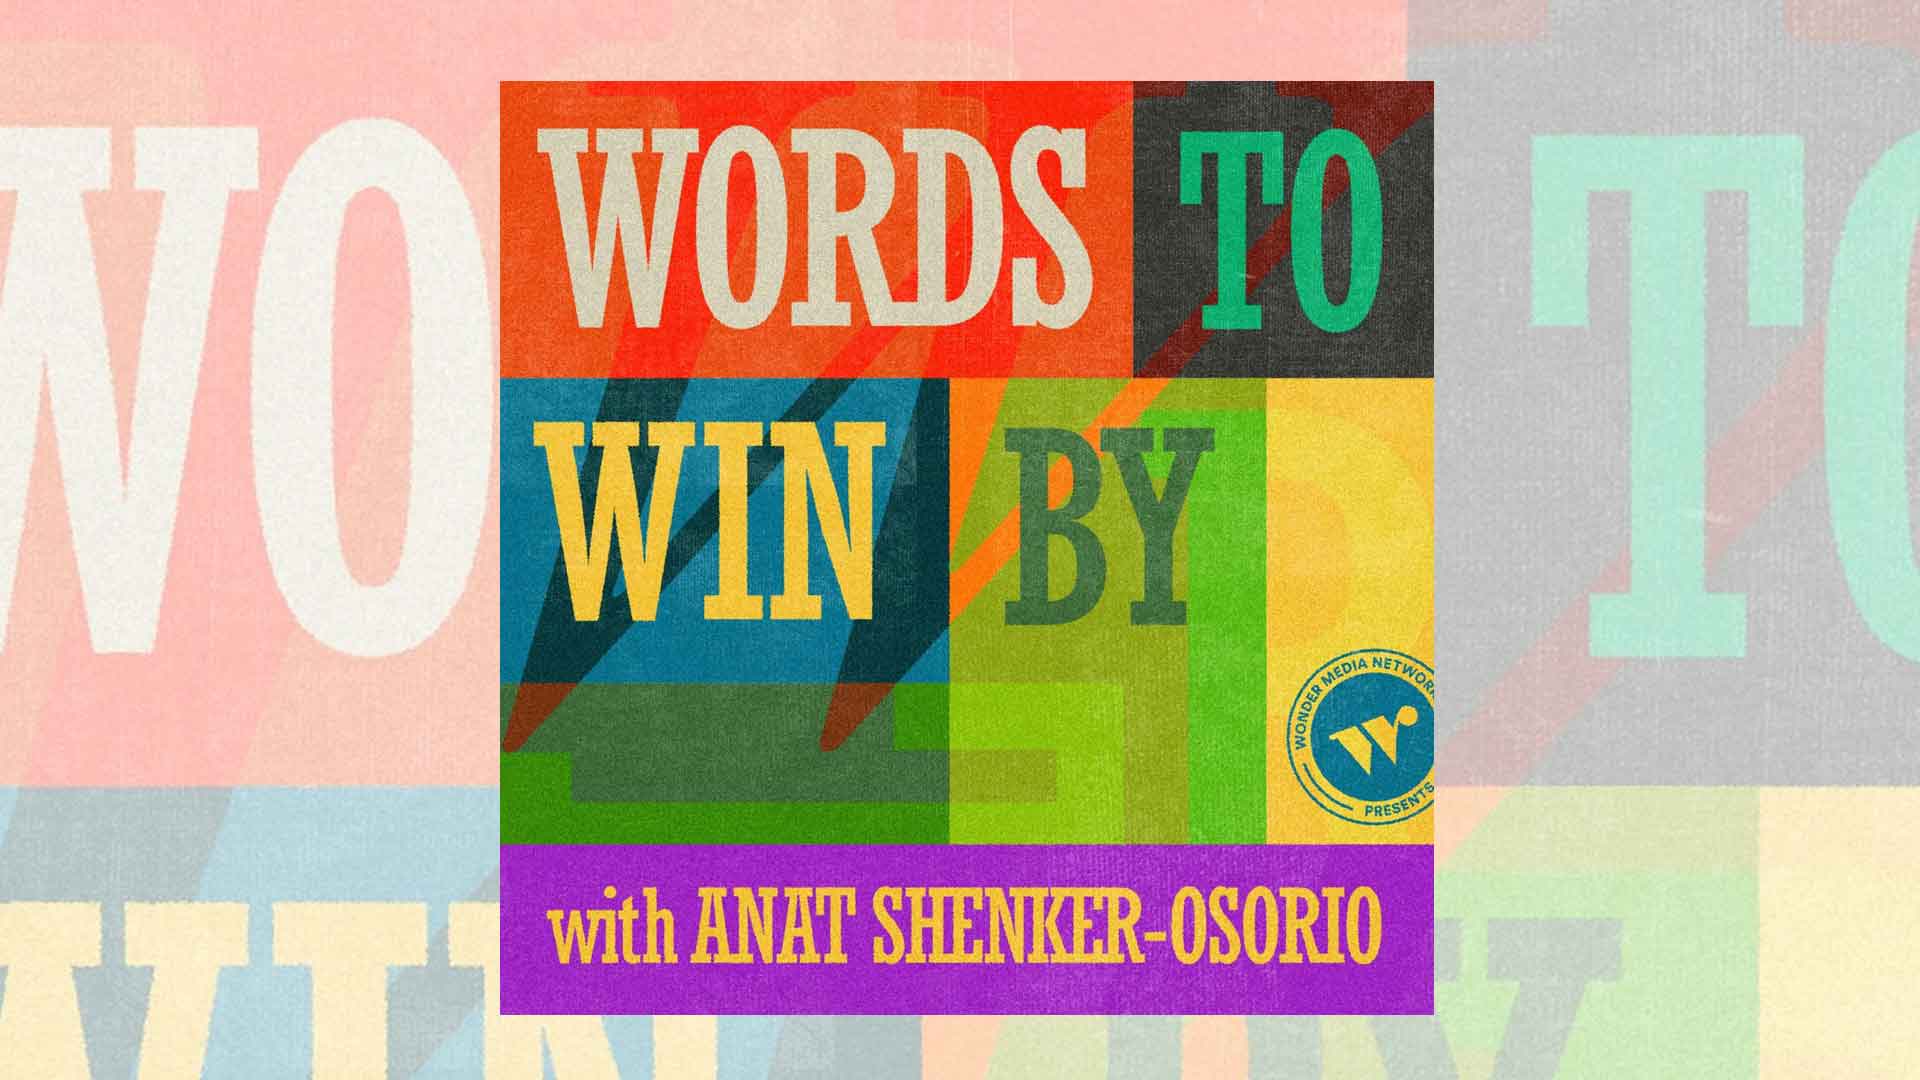 Colourful logo with the text "words to Win By with Anat Shenker-Osorio"